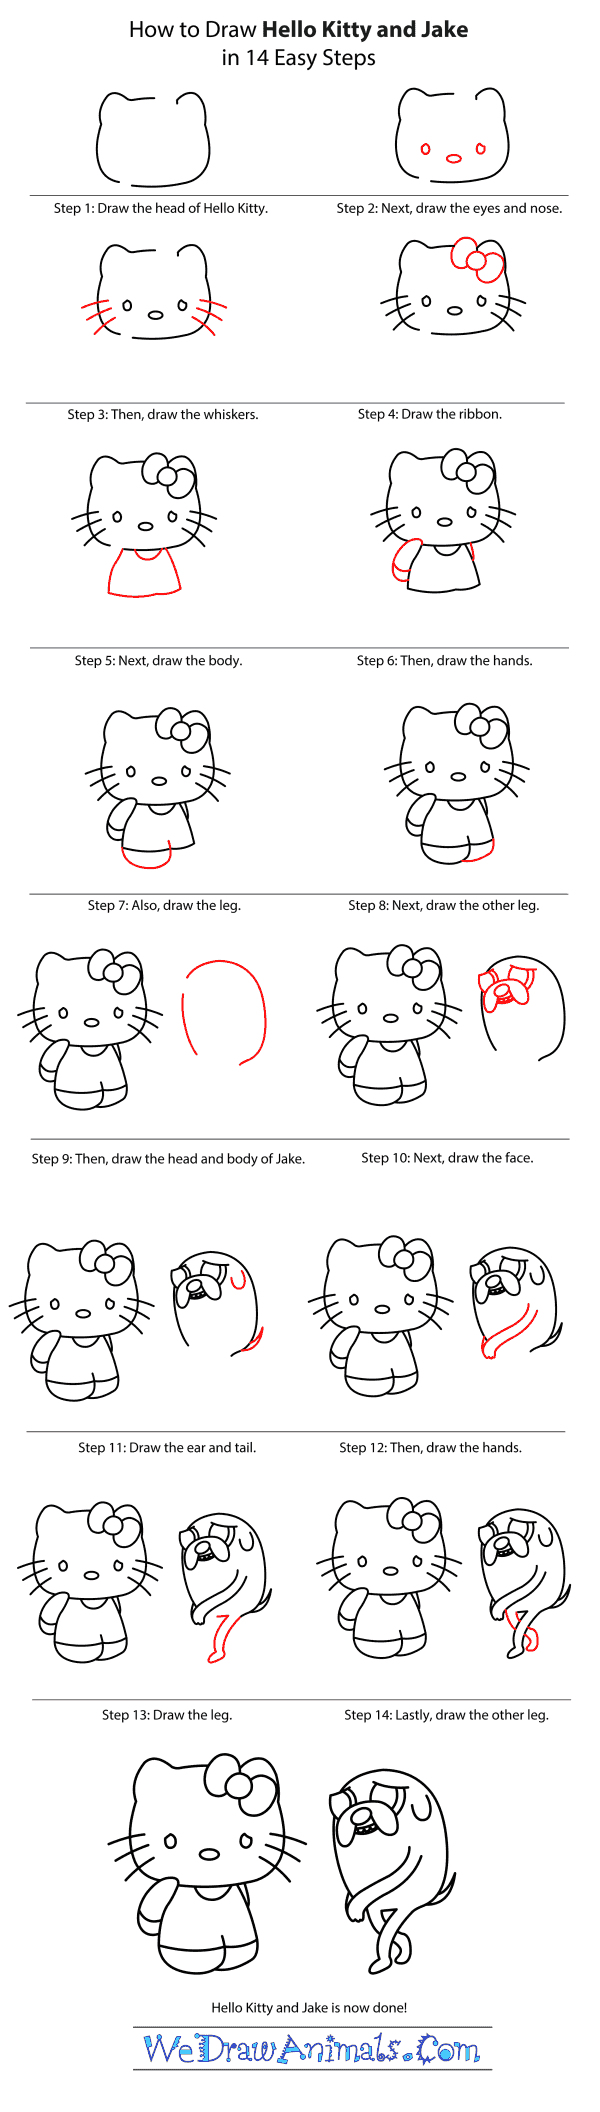 How to Draw Hello Kitty - Step-by-Step Tutorial